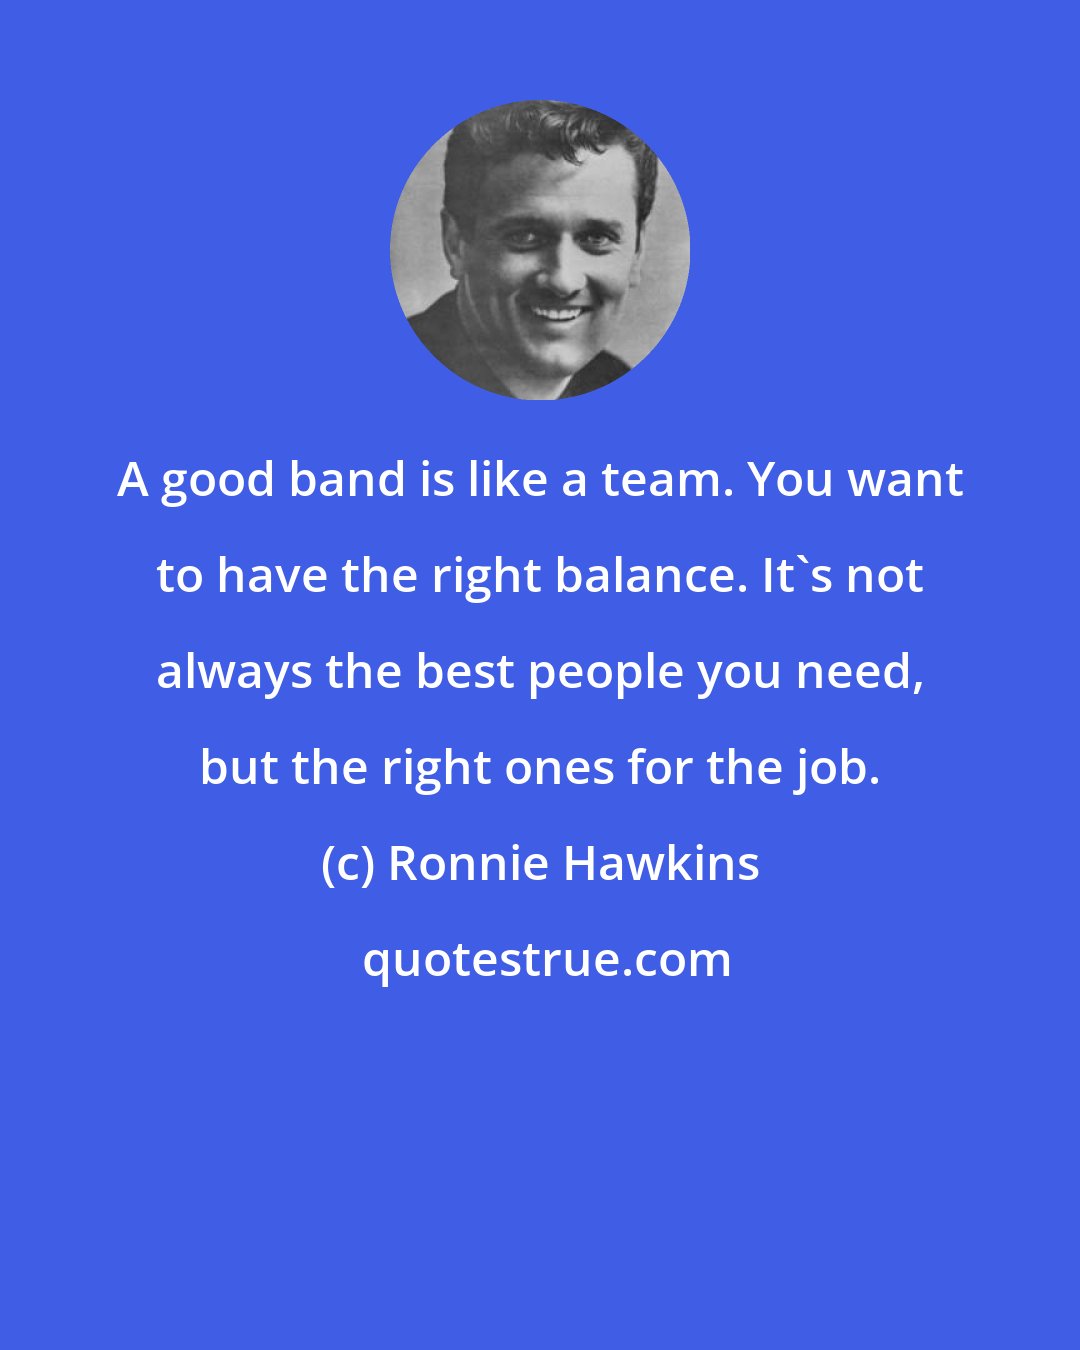 Ronnie Hawkins: A good band is like a team. You want to have the right balance. It's not always the best people you need, but the right ones for the job.